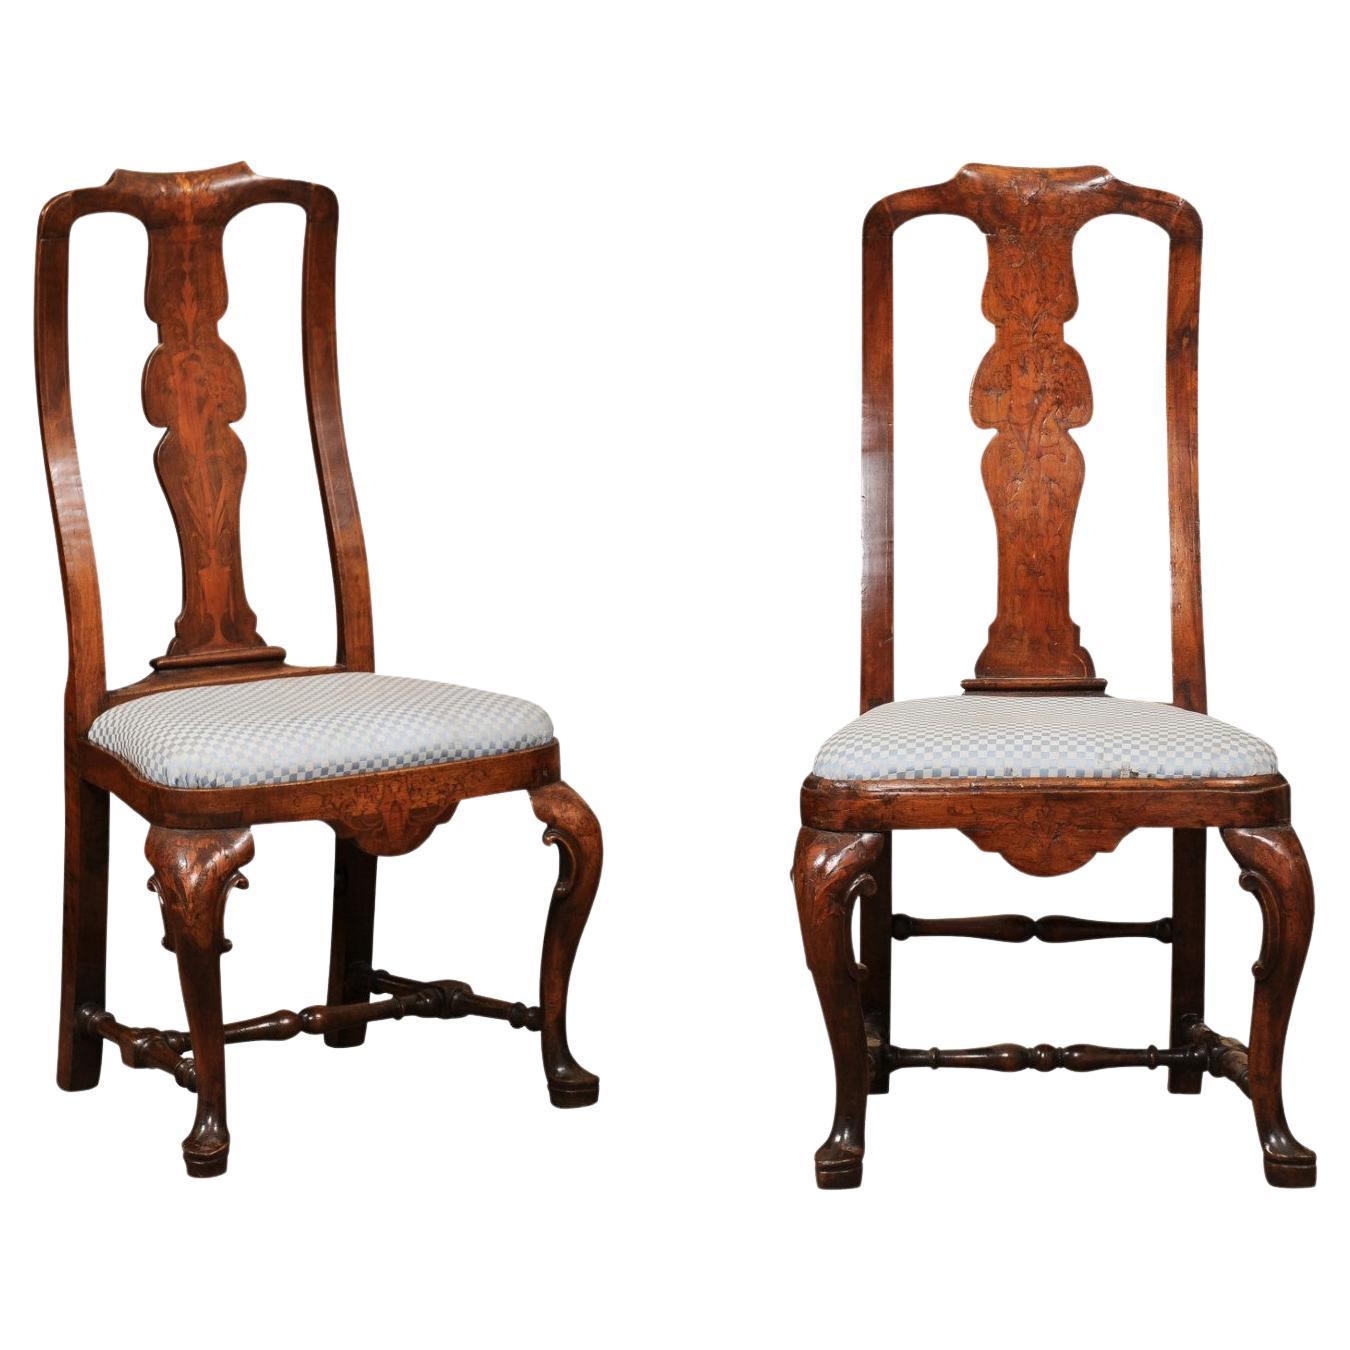 Pair of Dutch 18th Century Walnut Side Chairs with Marquetry Inlay & Pad Feet